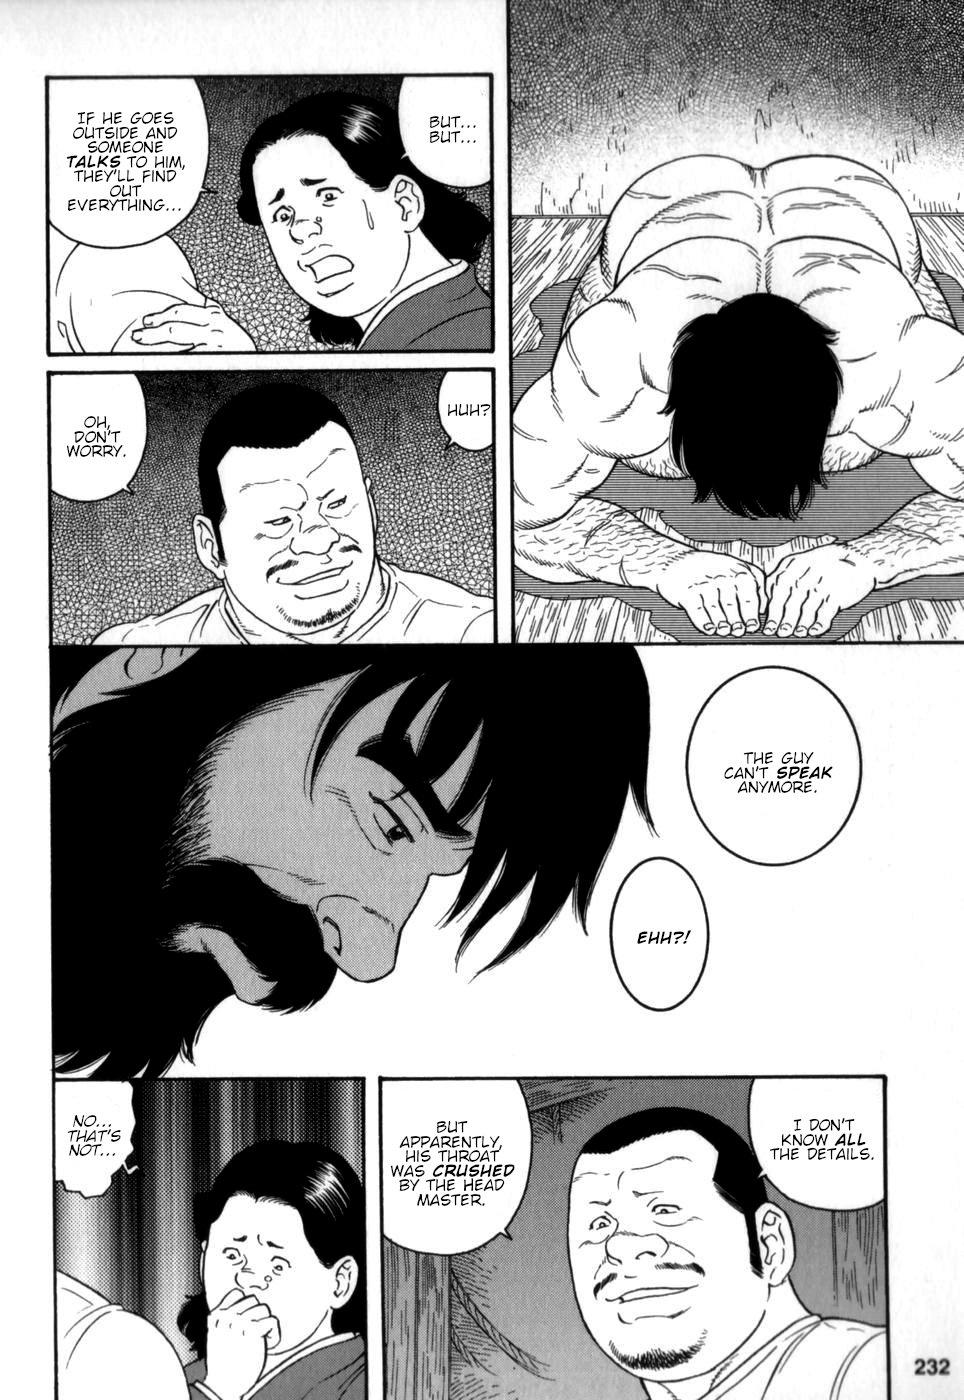 Sucking Dicks Gedou no Ie Chuukan | House of Brutes Vol. 2 Ch. 8 Leaked - Page 2